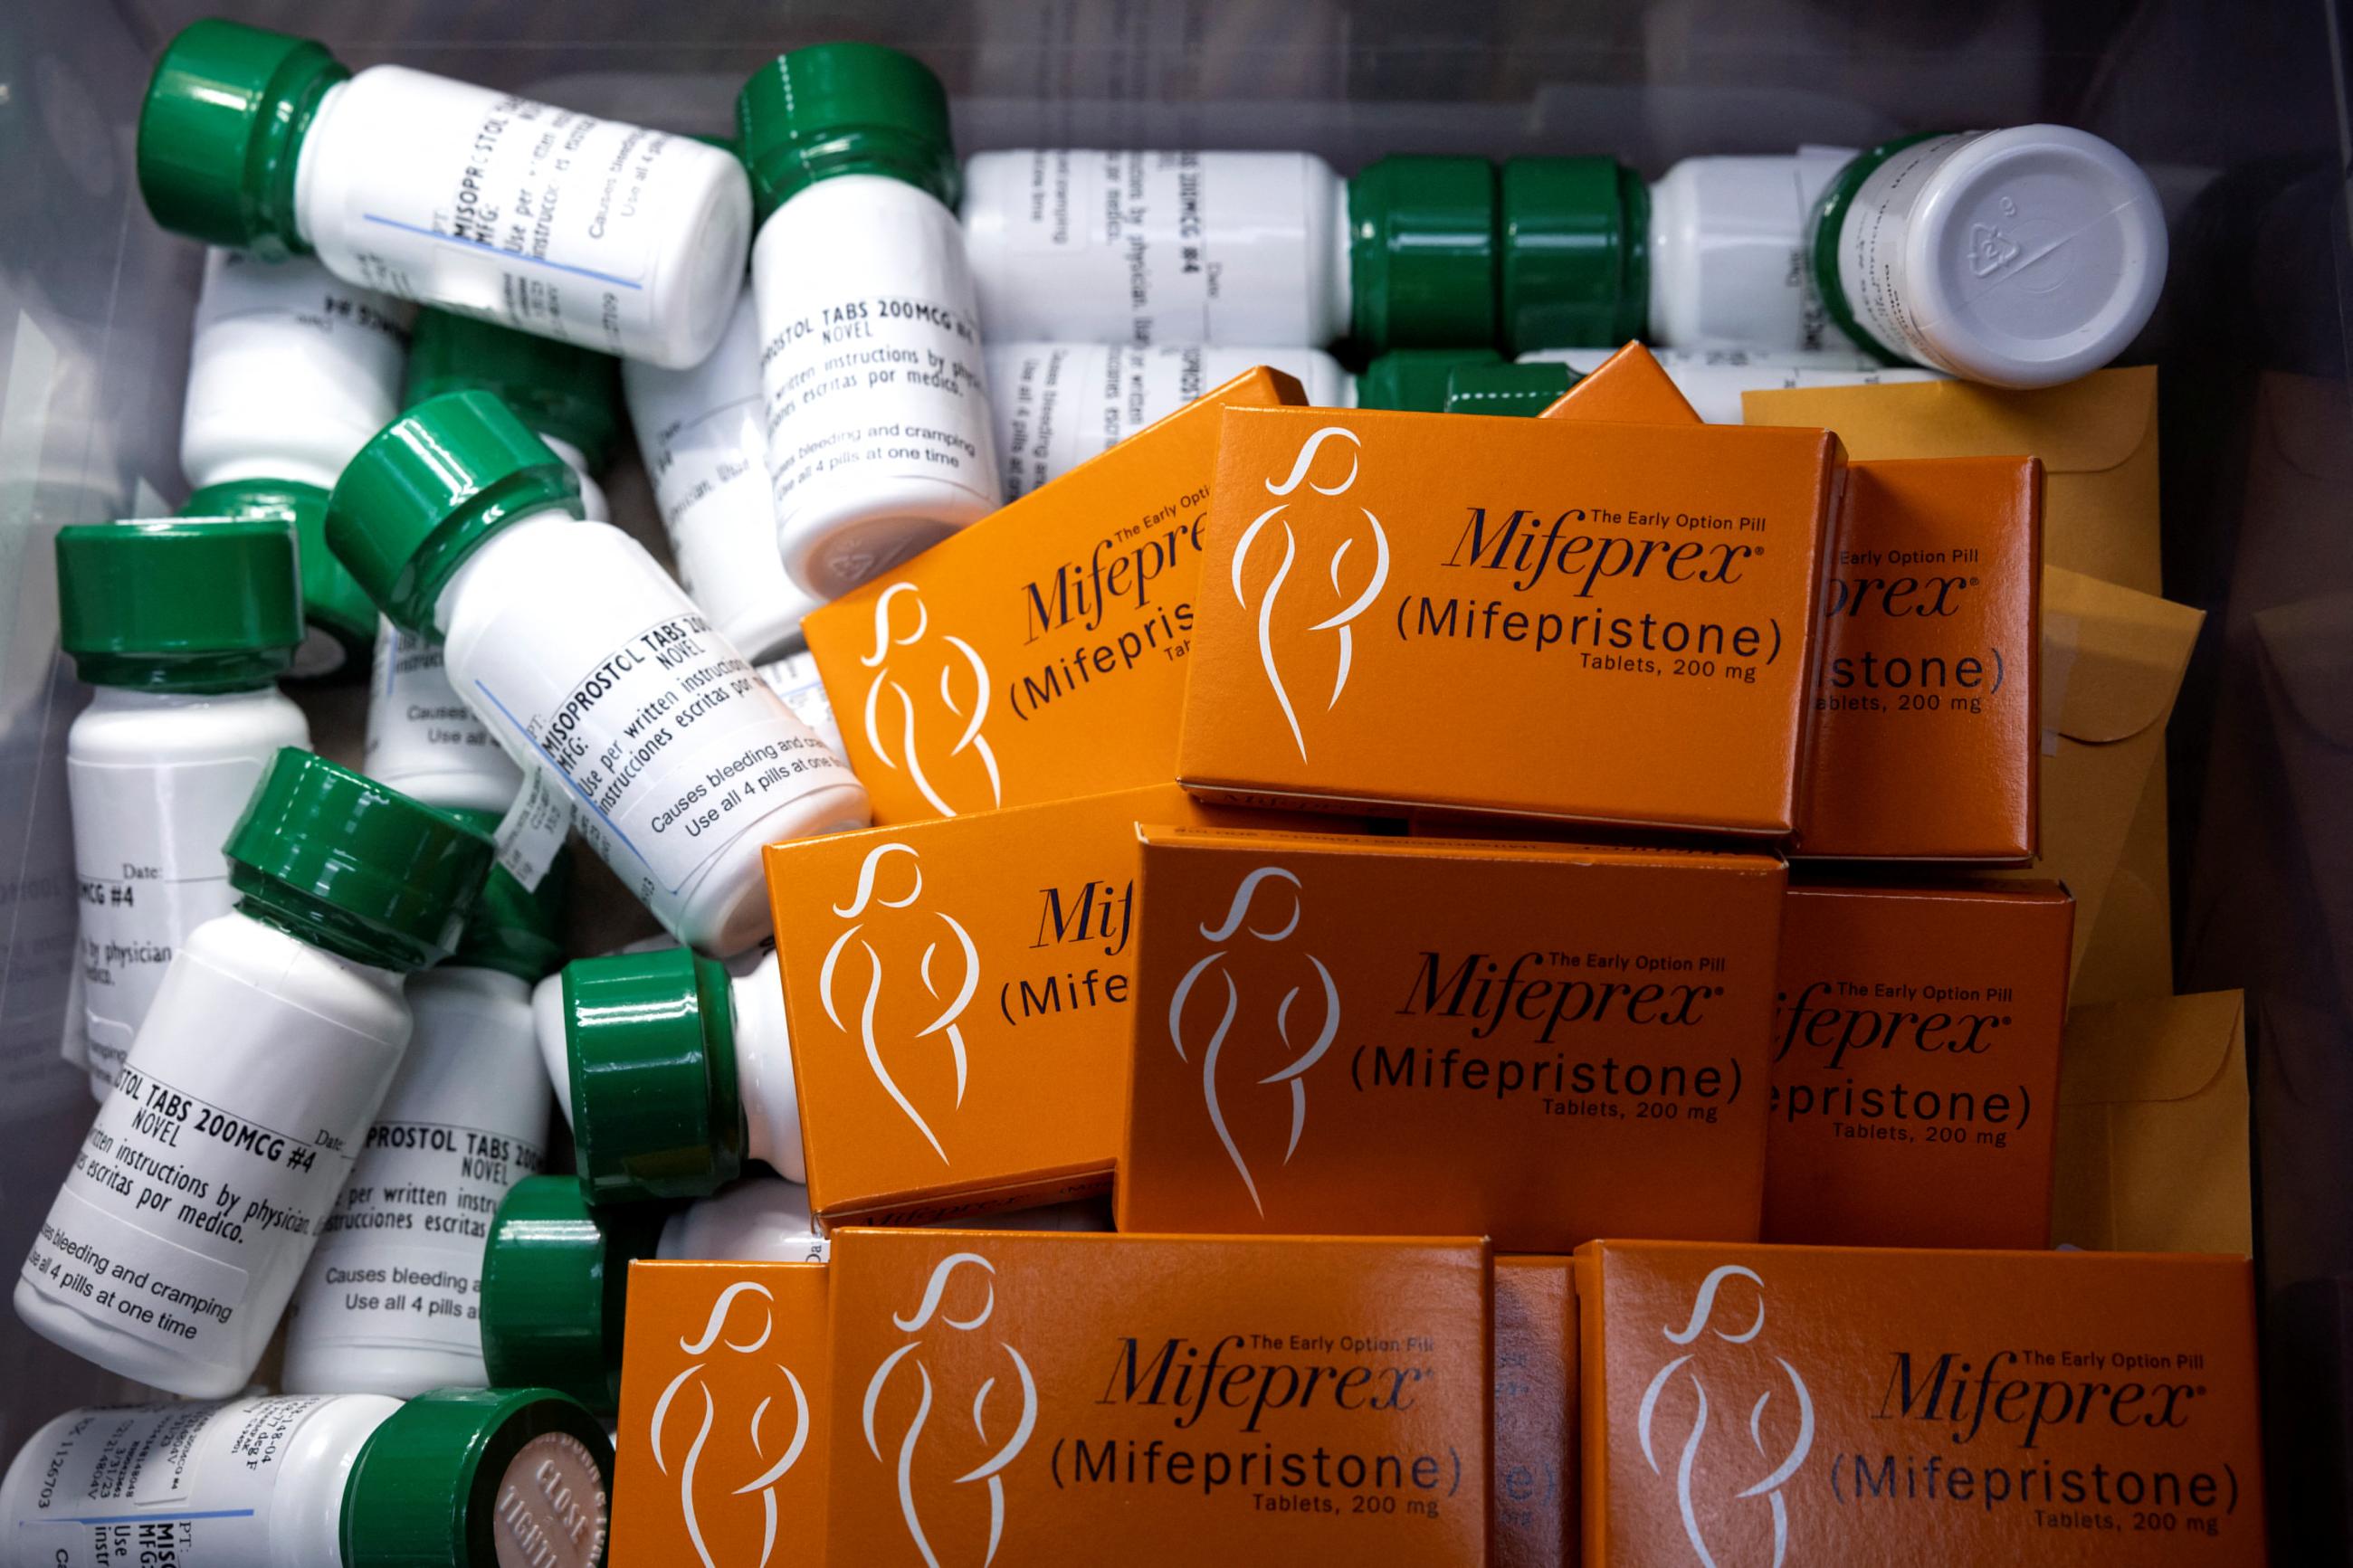 The medications used in a medical abortion lay in a storage bin at an abortion clinic.